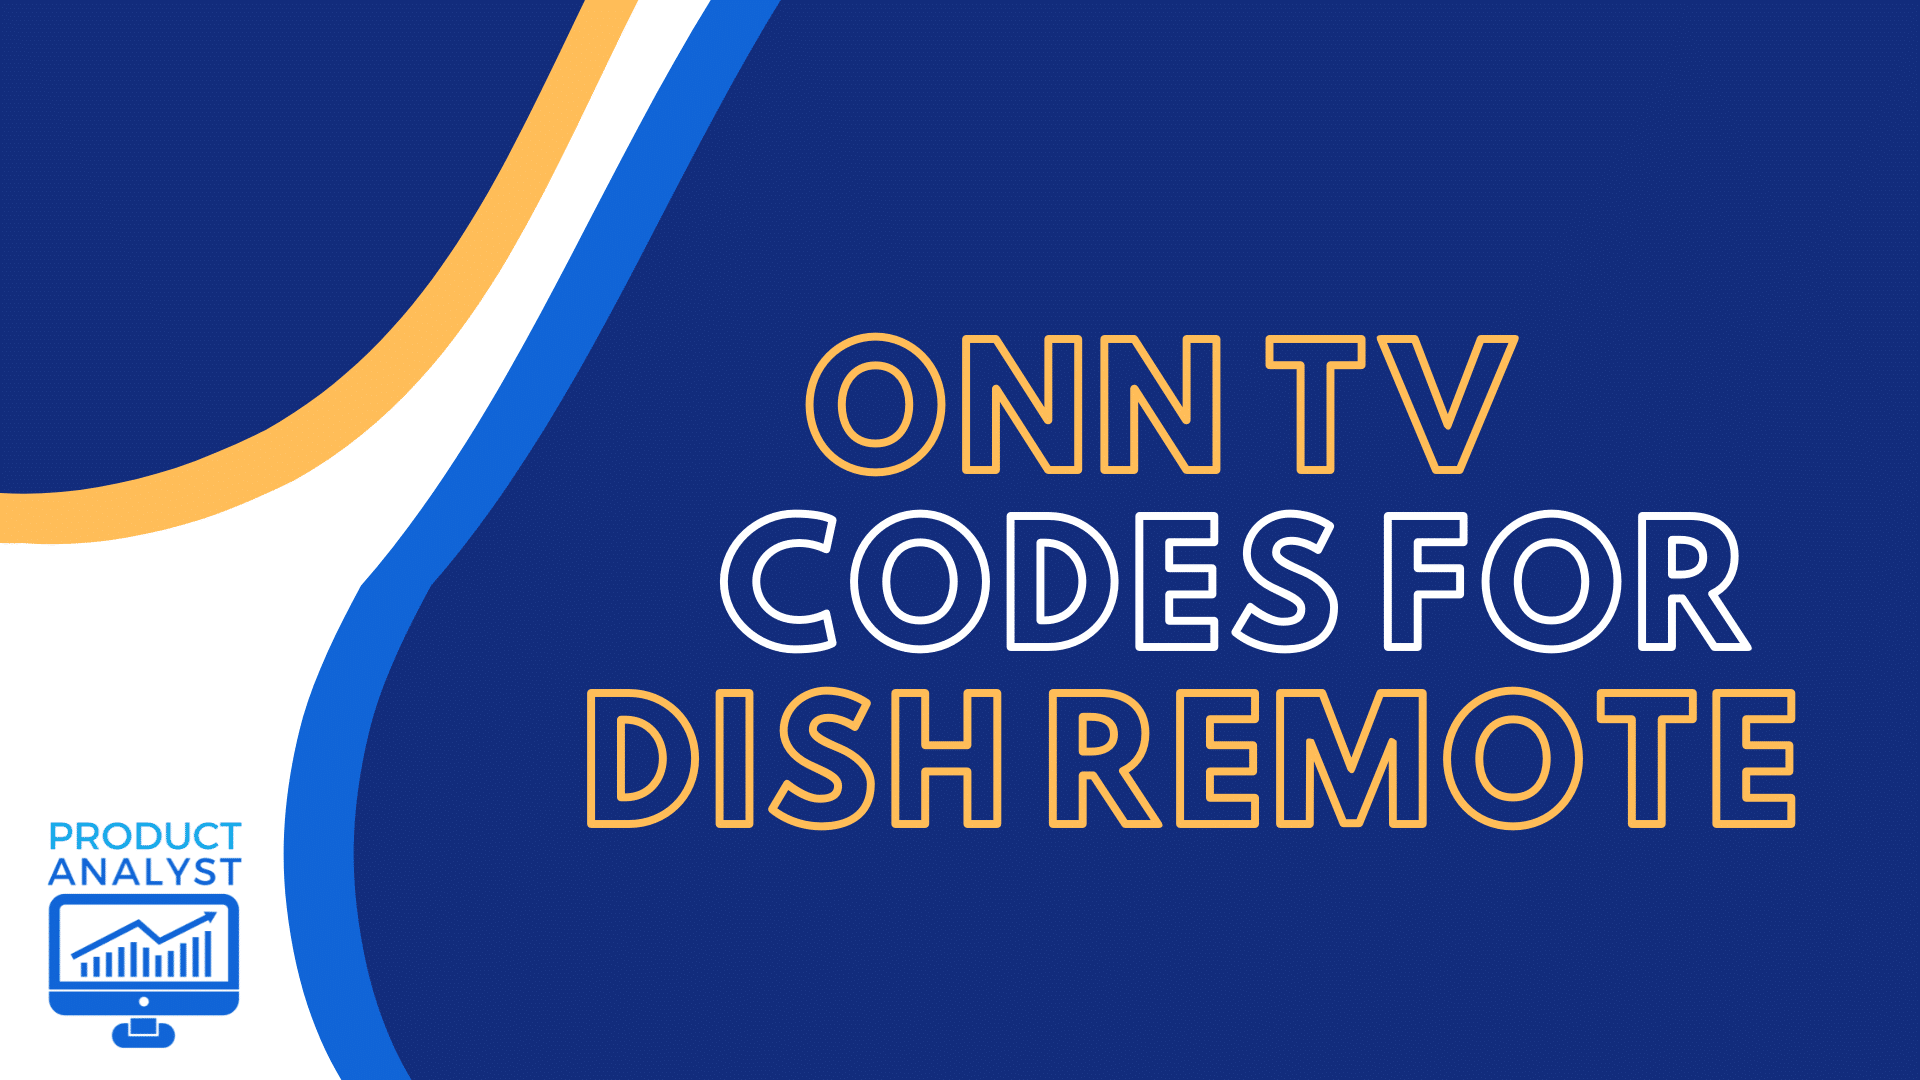 1. Spectrum Remote Control Codes for ONN TV - wide 8